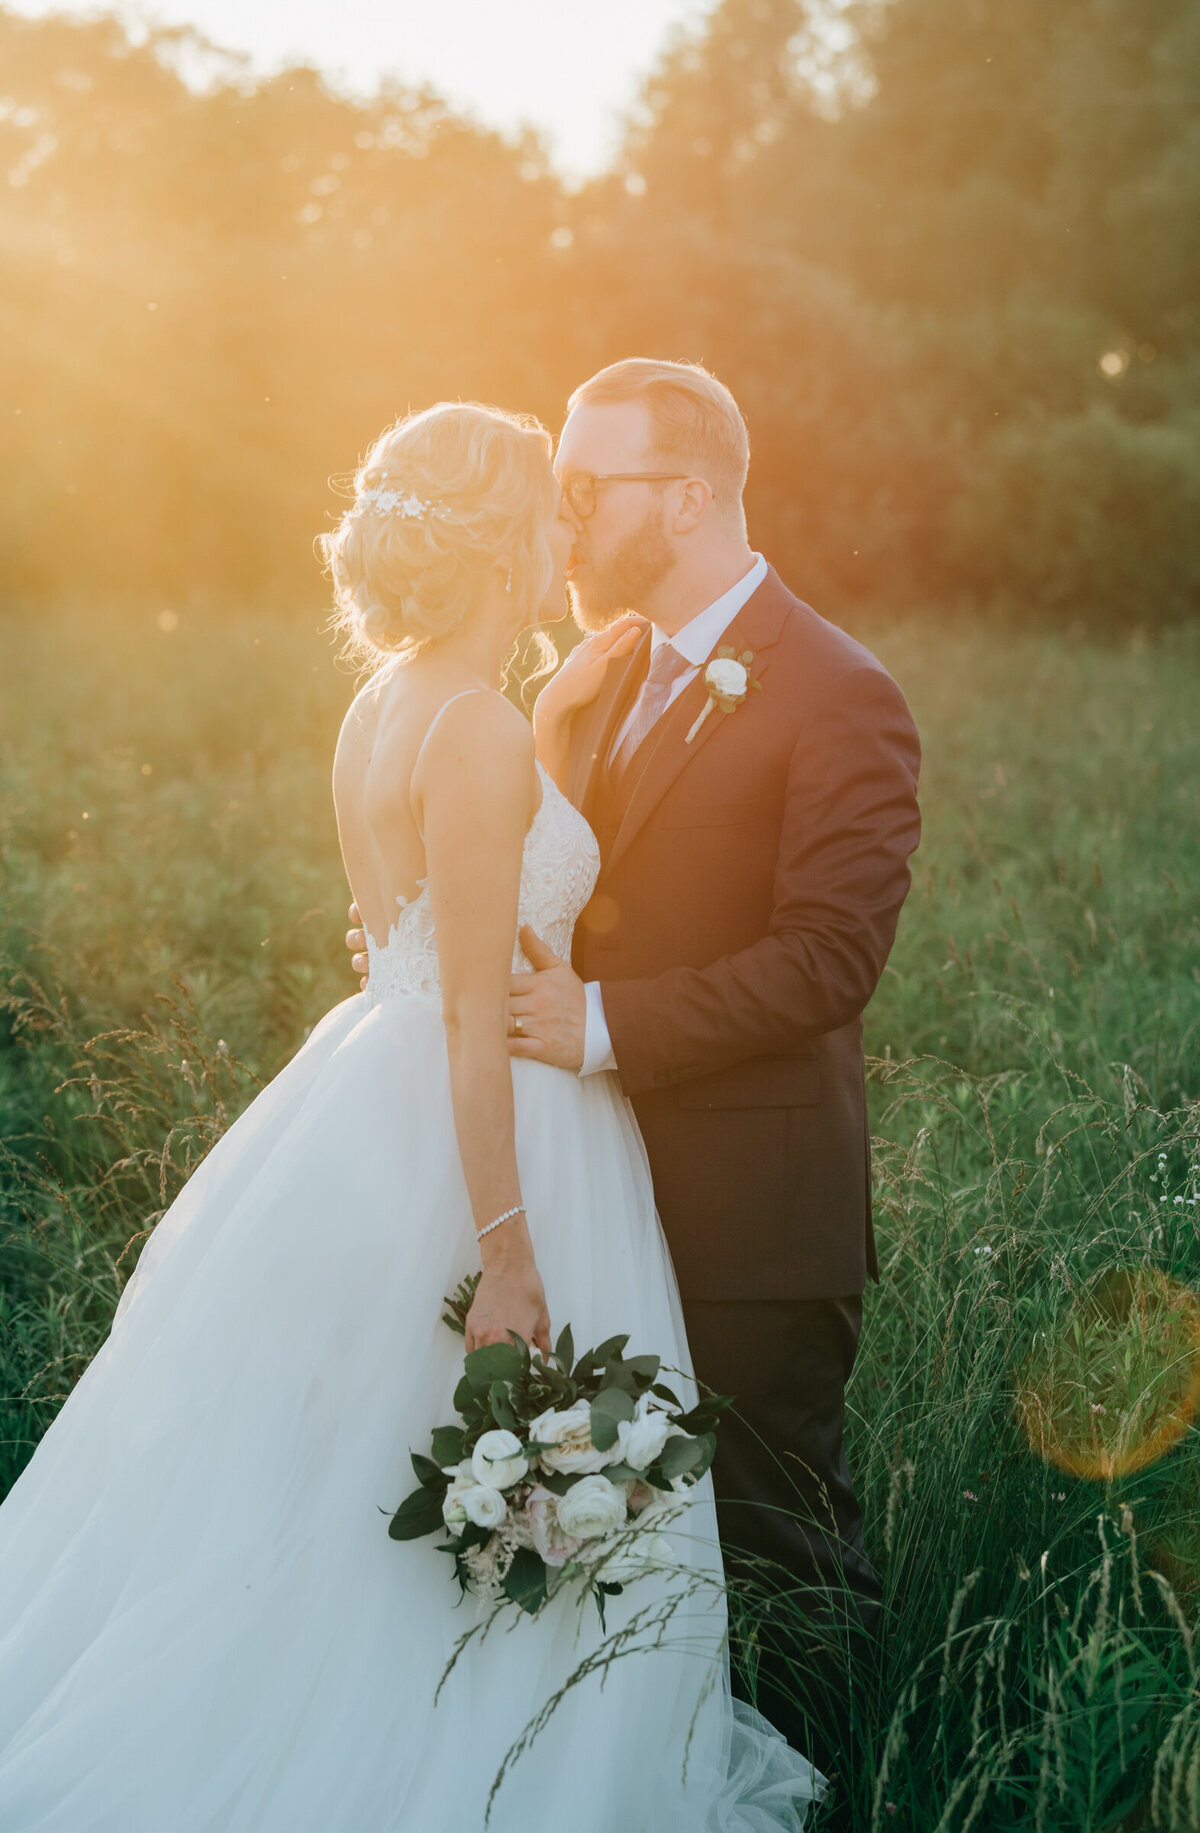 Glowing bride and groom during glamorous sunset wedding portraits